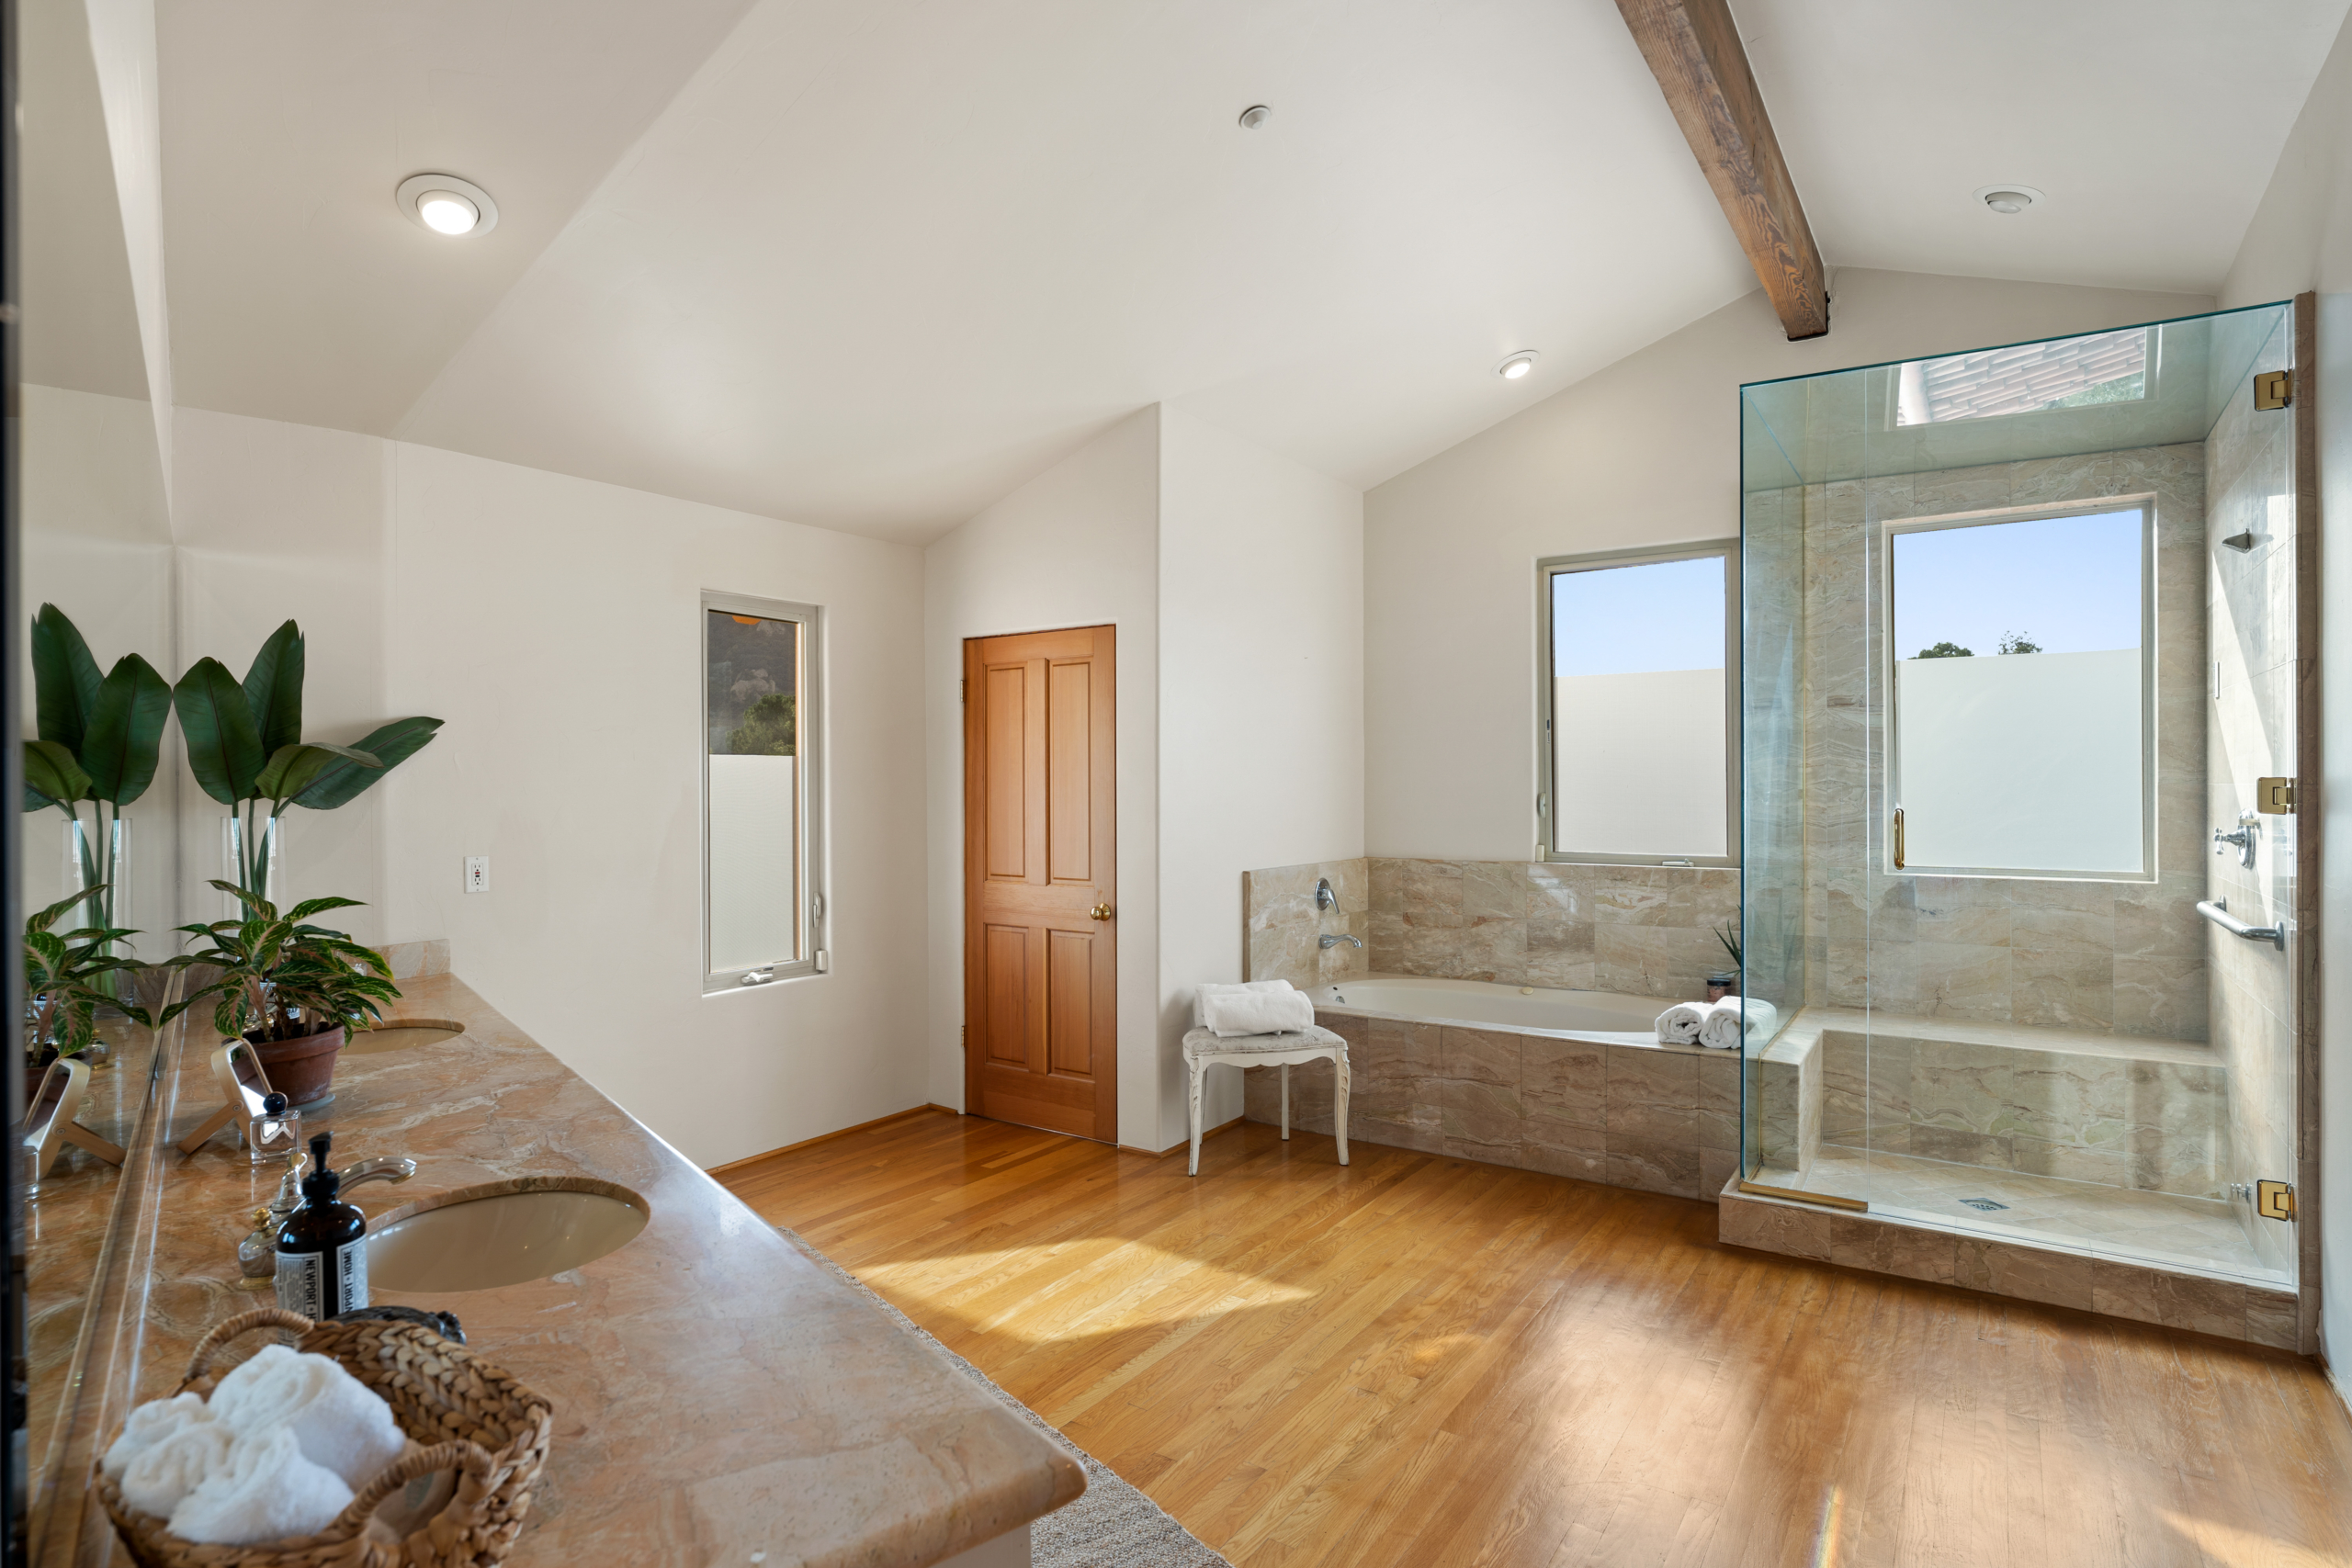 Bathroom with bathtub, shower glass and mirror at 2175 Cold Canyon Road Calabasas